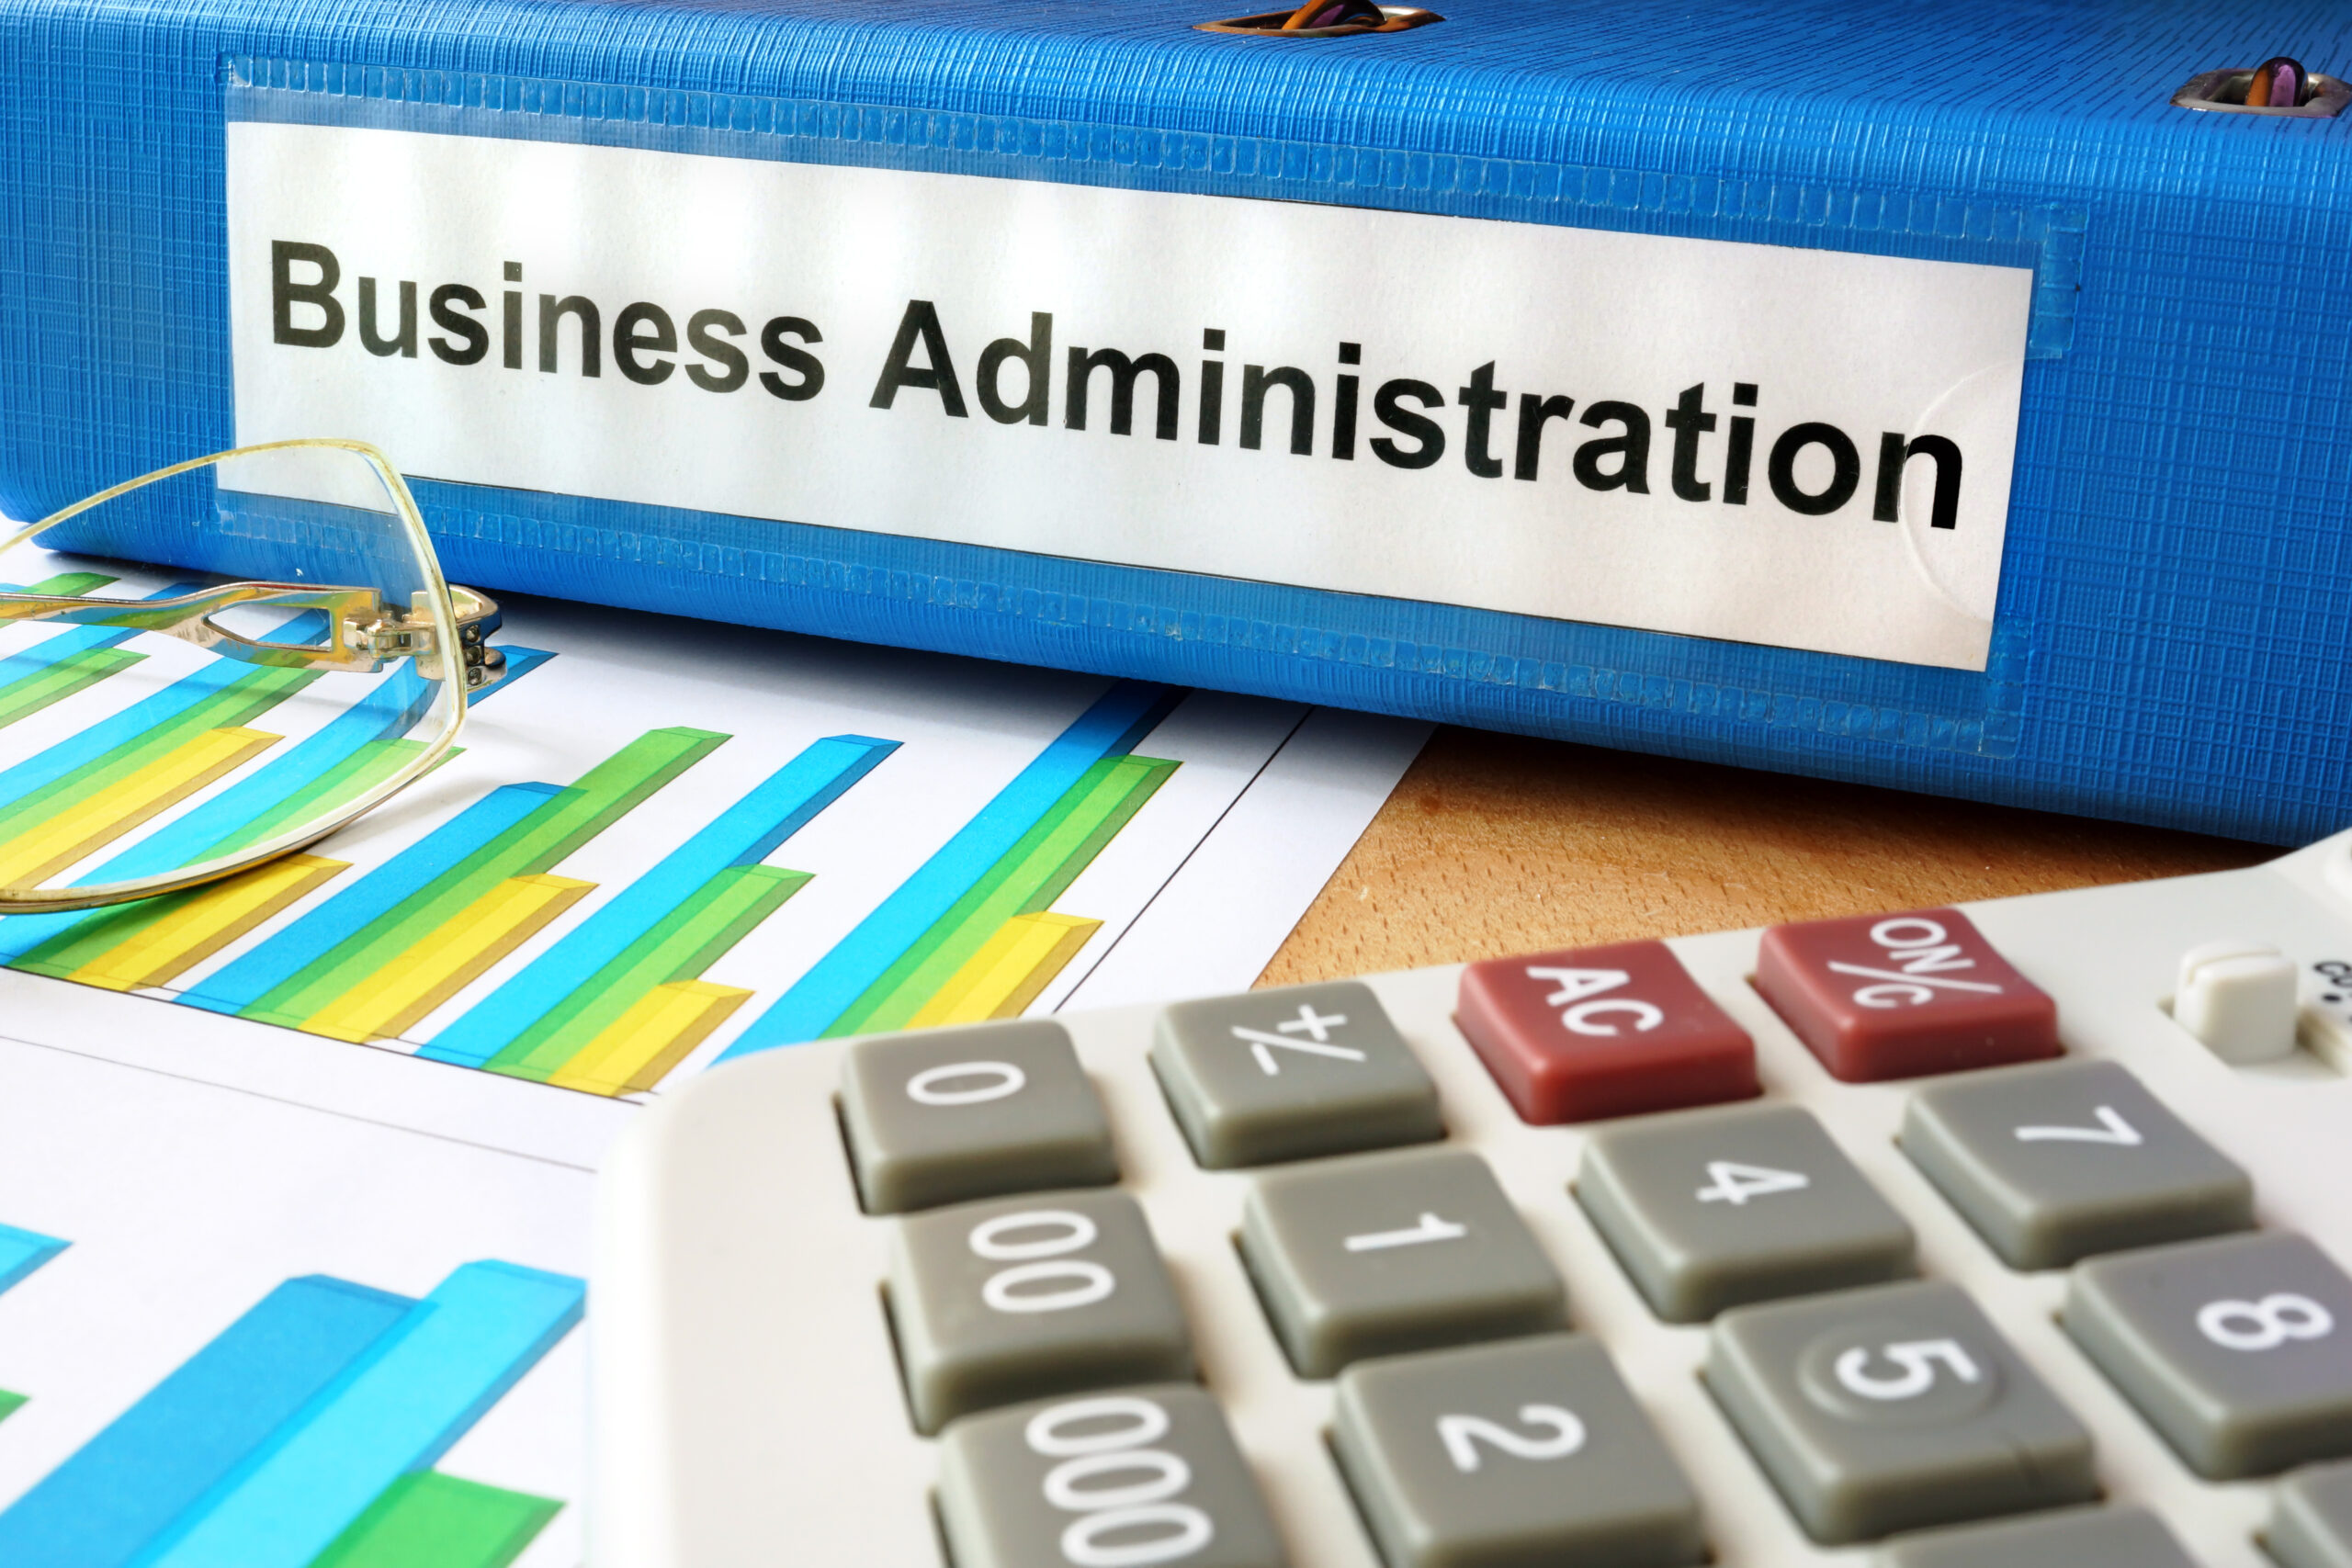 CASE STUDY: Is “Business Administration” Too General for Specialty